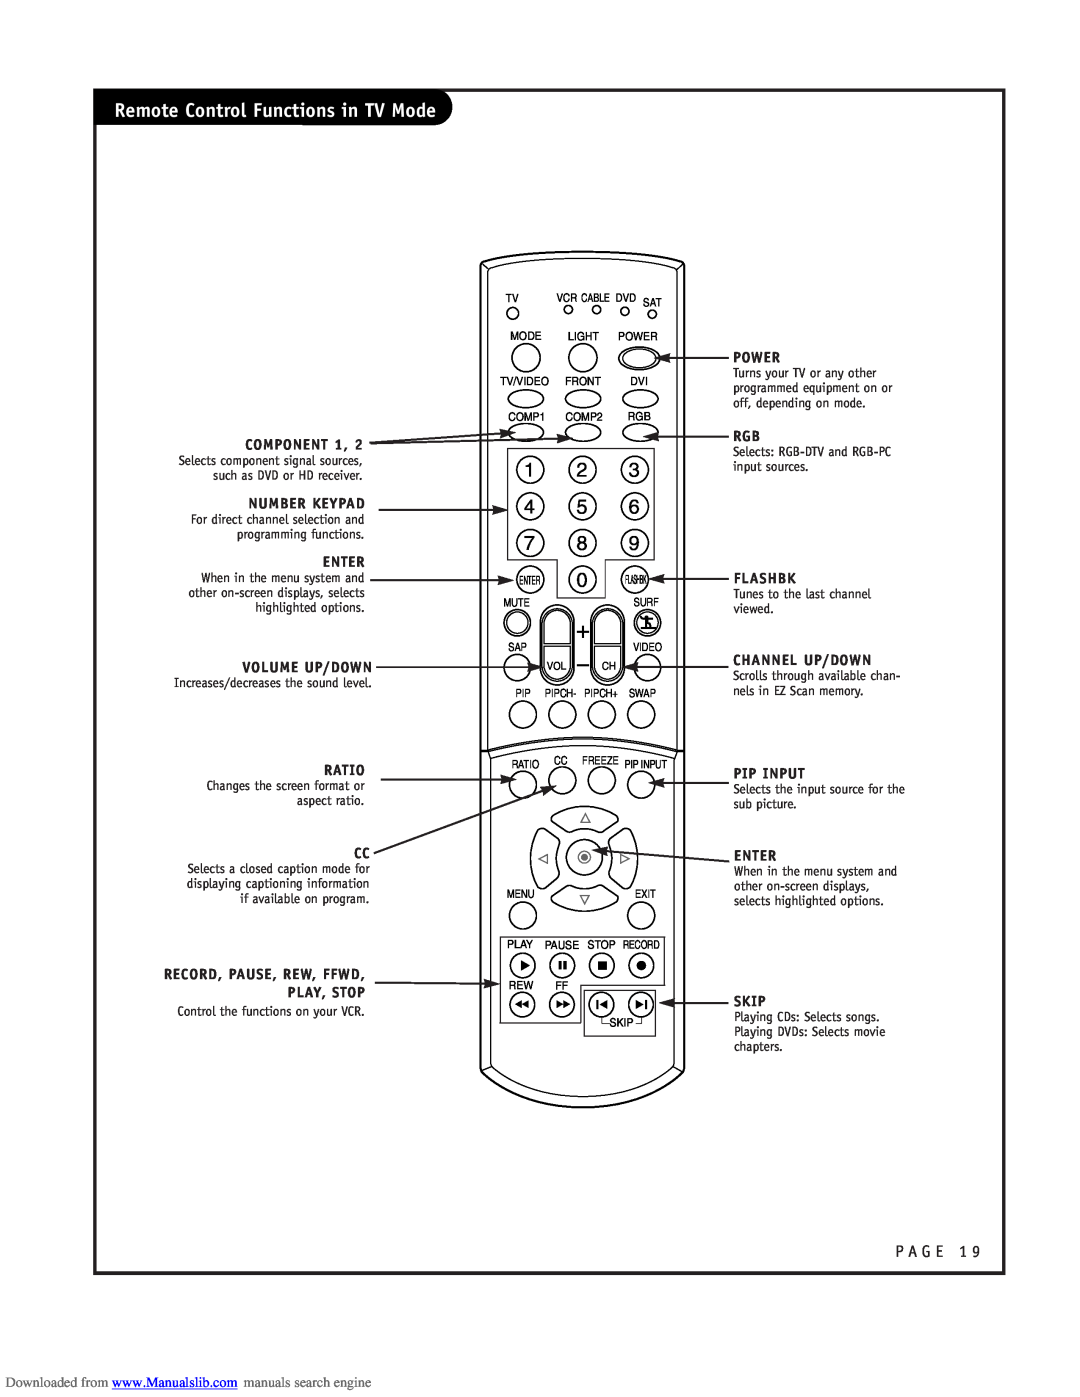 LG Electronics RU-52SZ53D owner manual Remote Control Functions in TV Mode, Selects RGB-DTV and RGB-PC input sources 